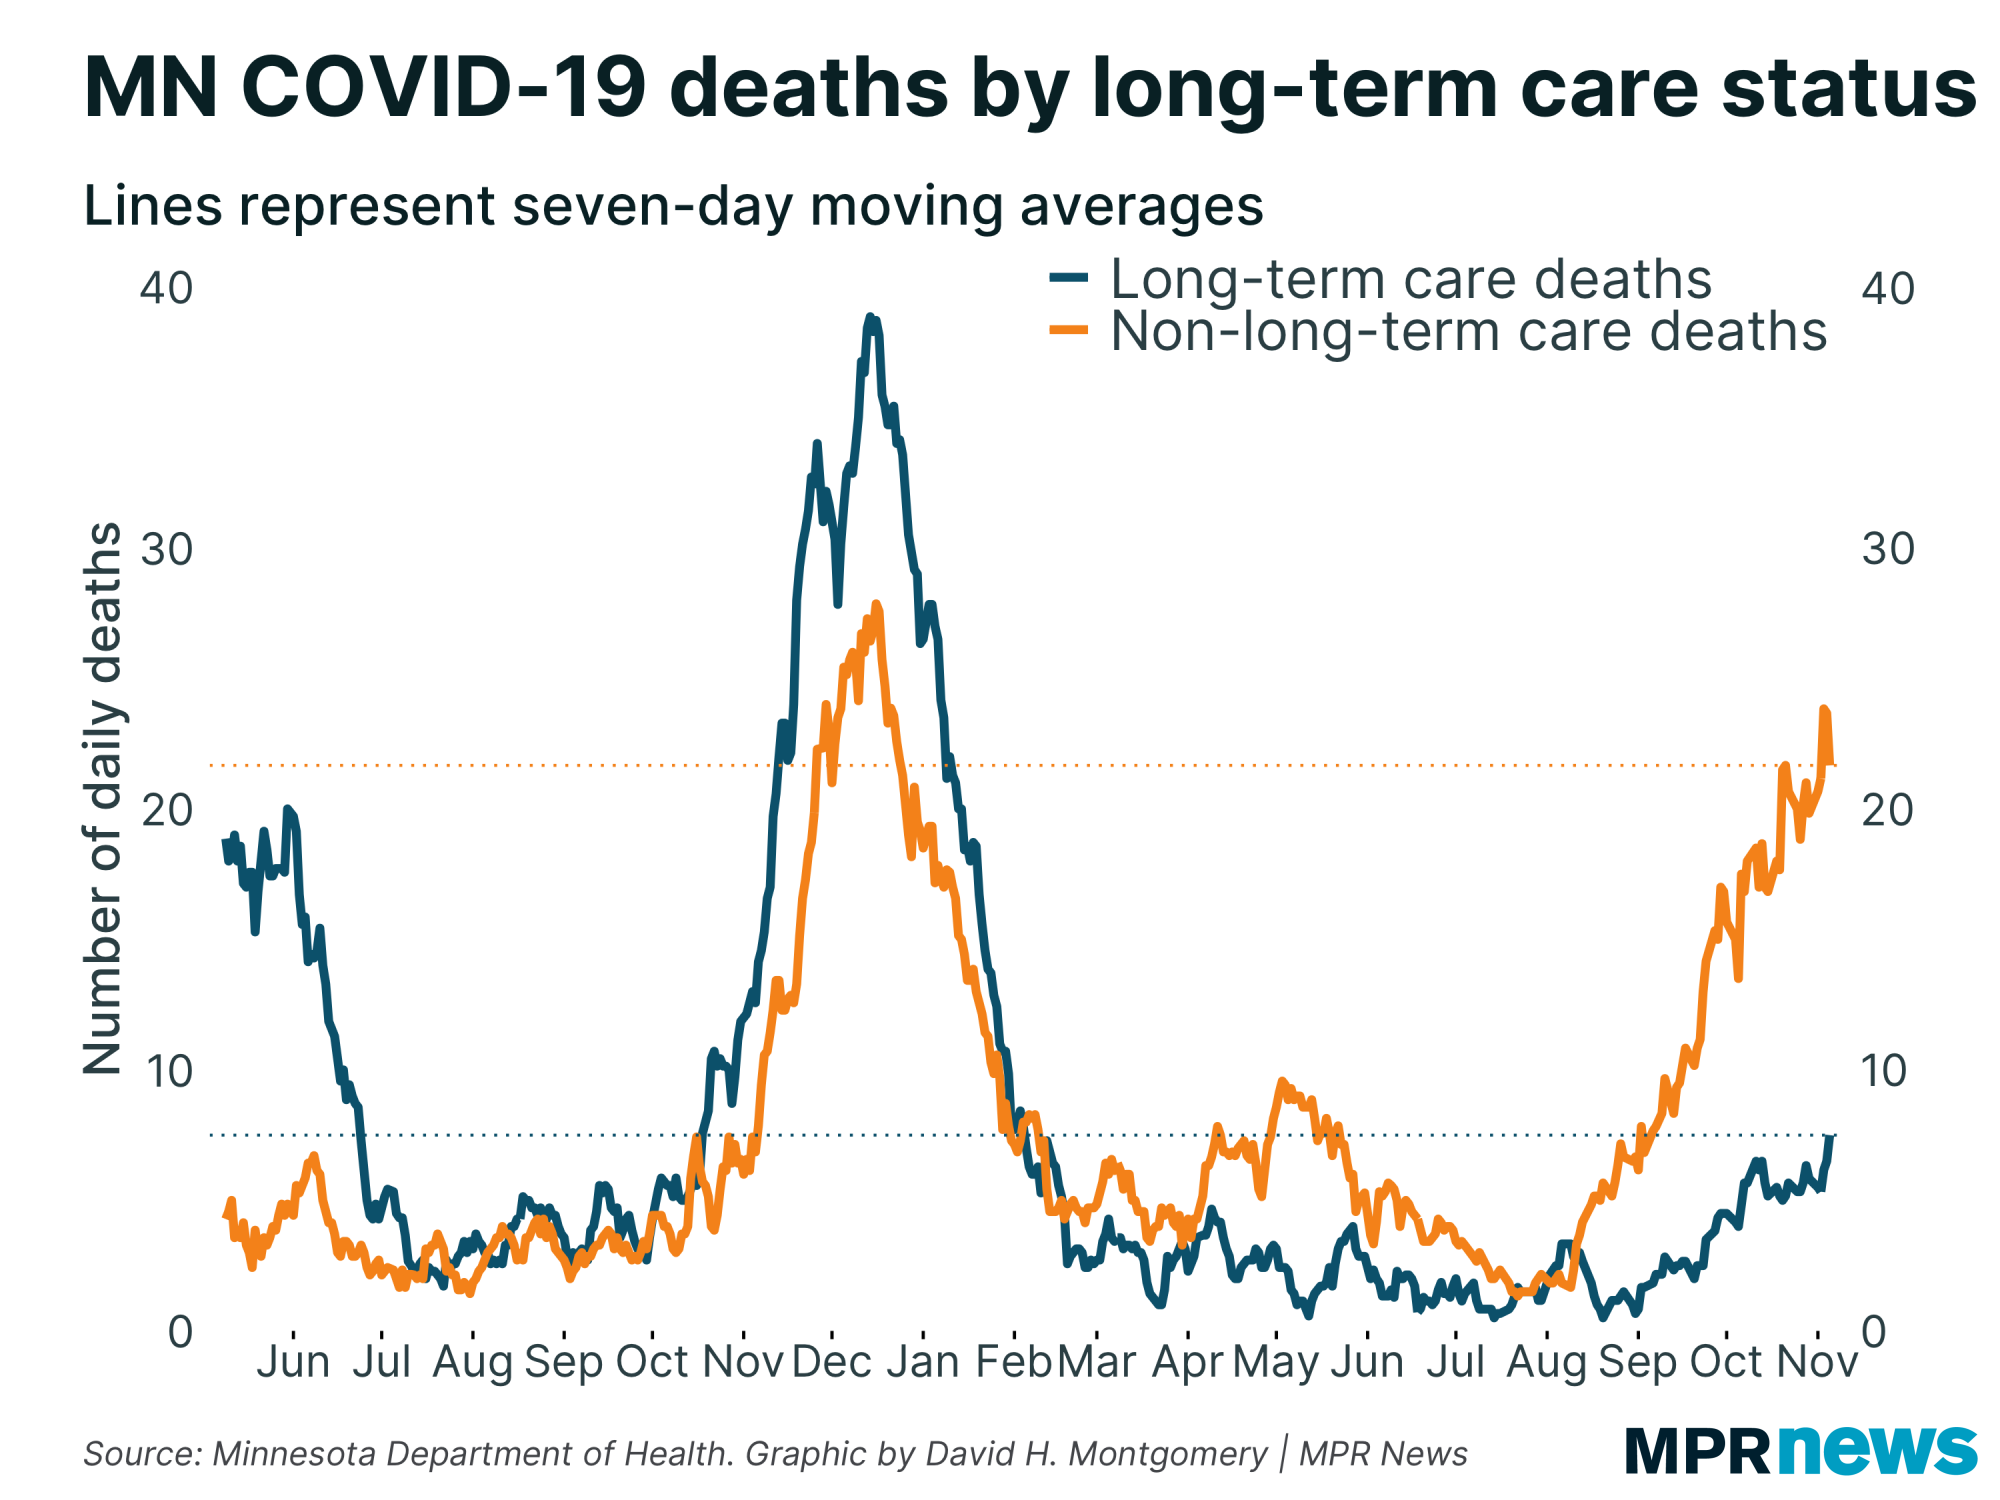 Graph of Minnesota COVID-19 deaths by long-term care status